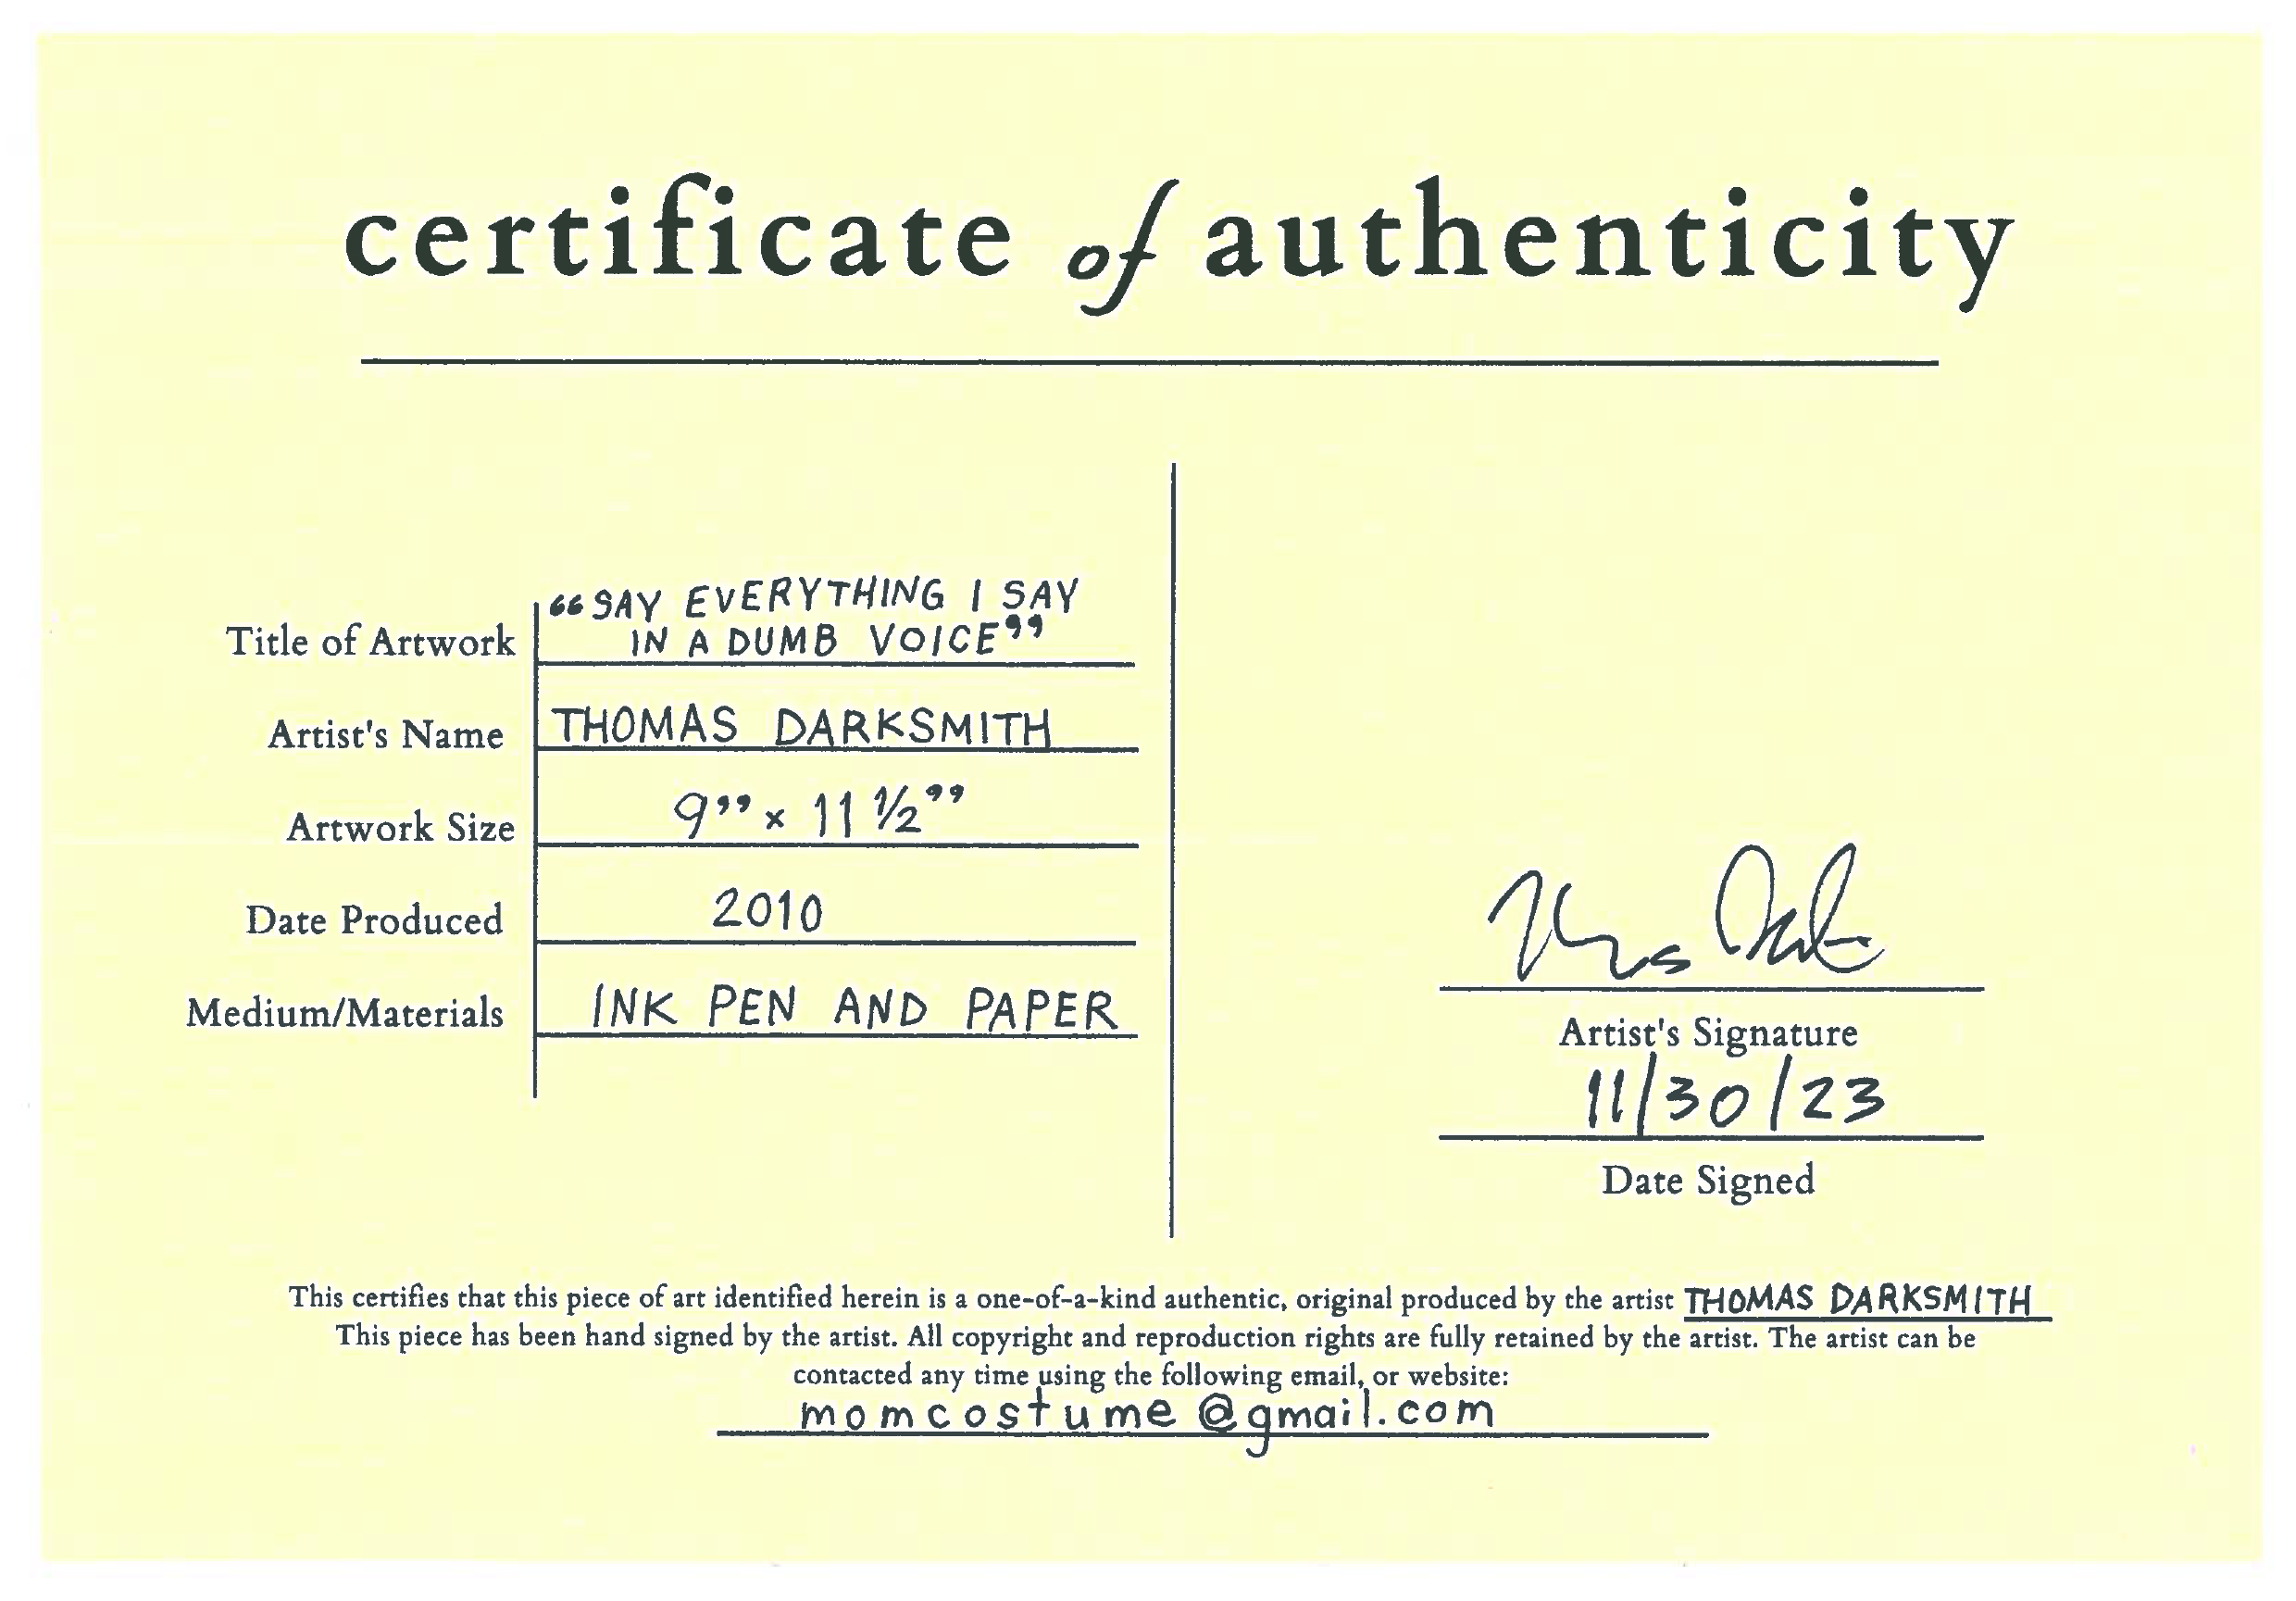 Certification of Authenticity